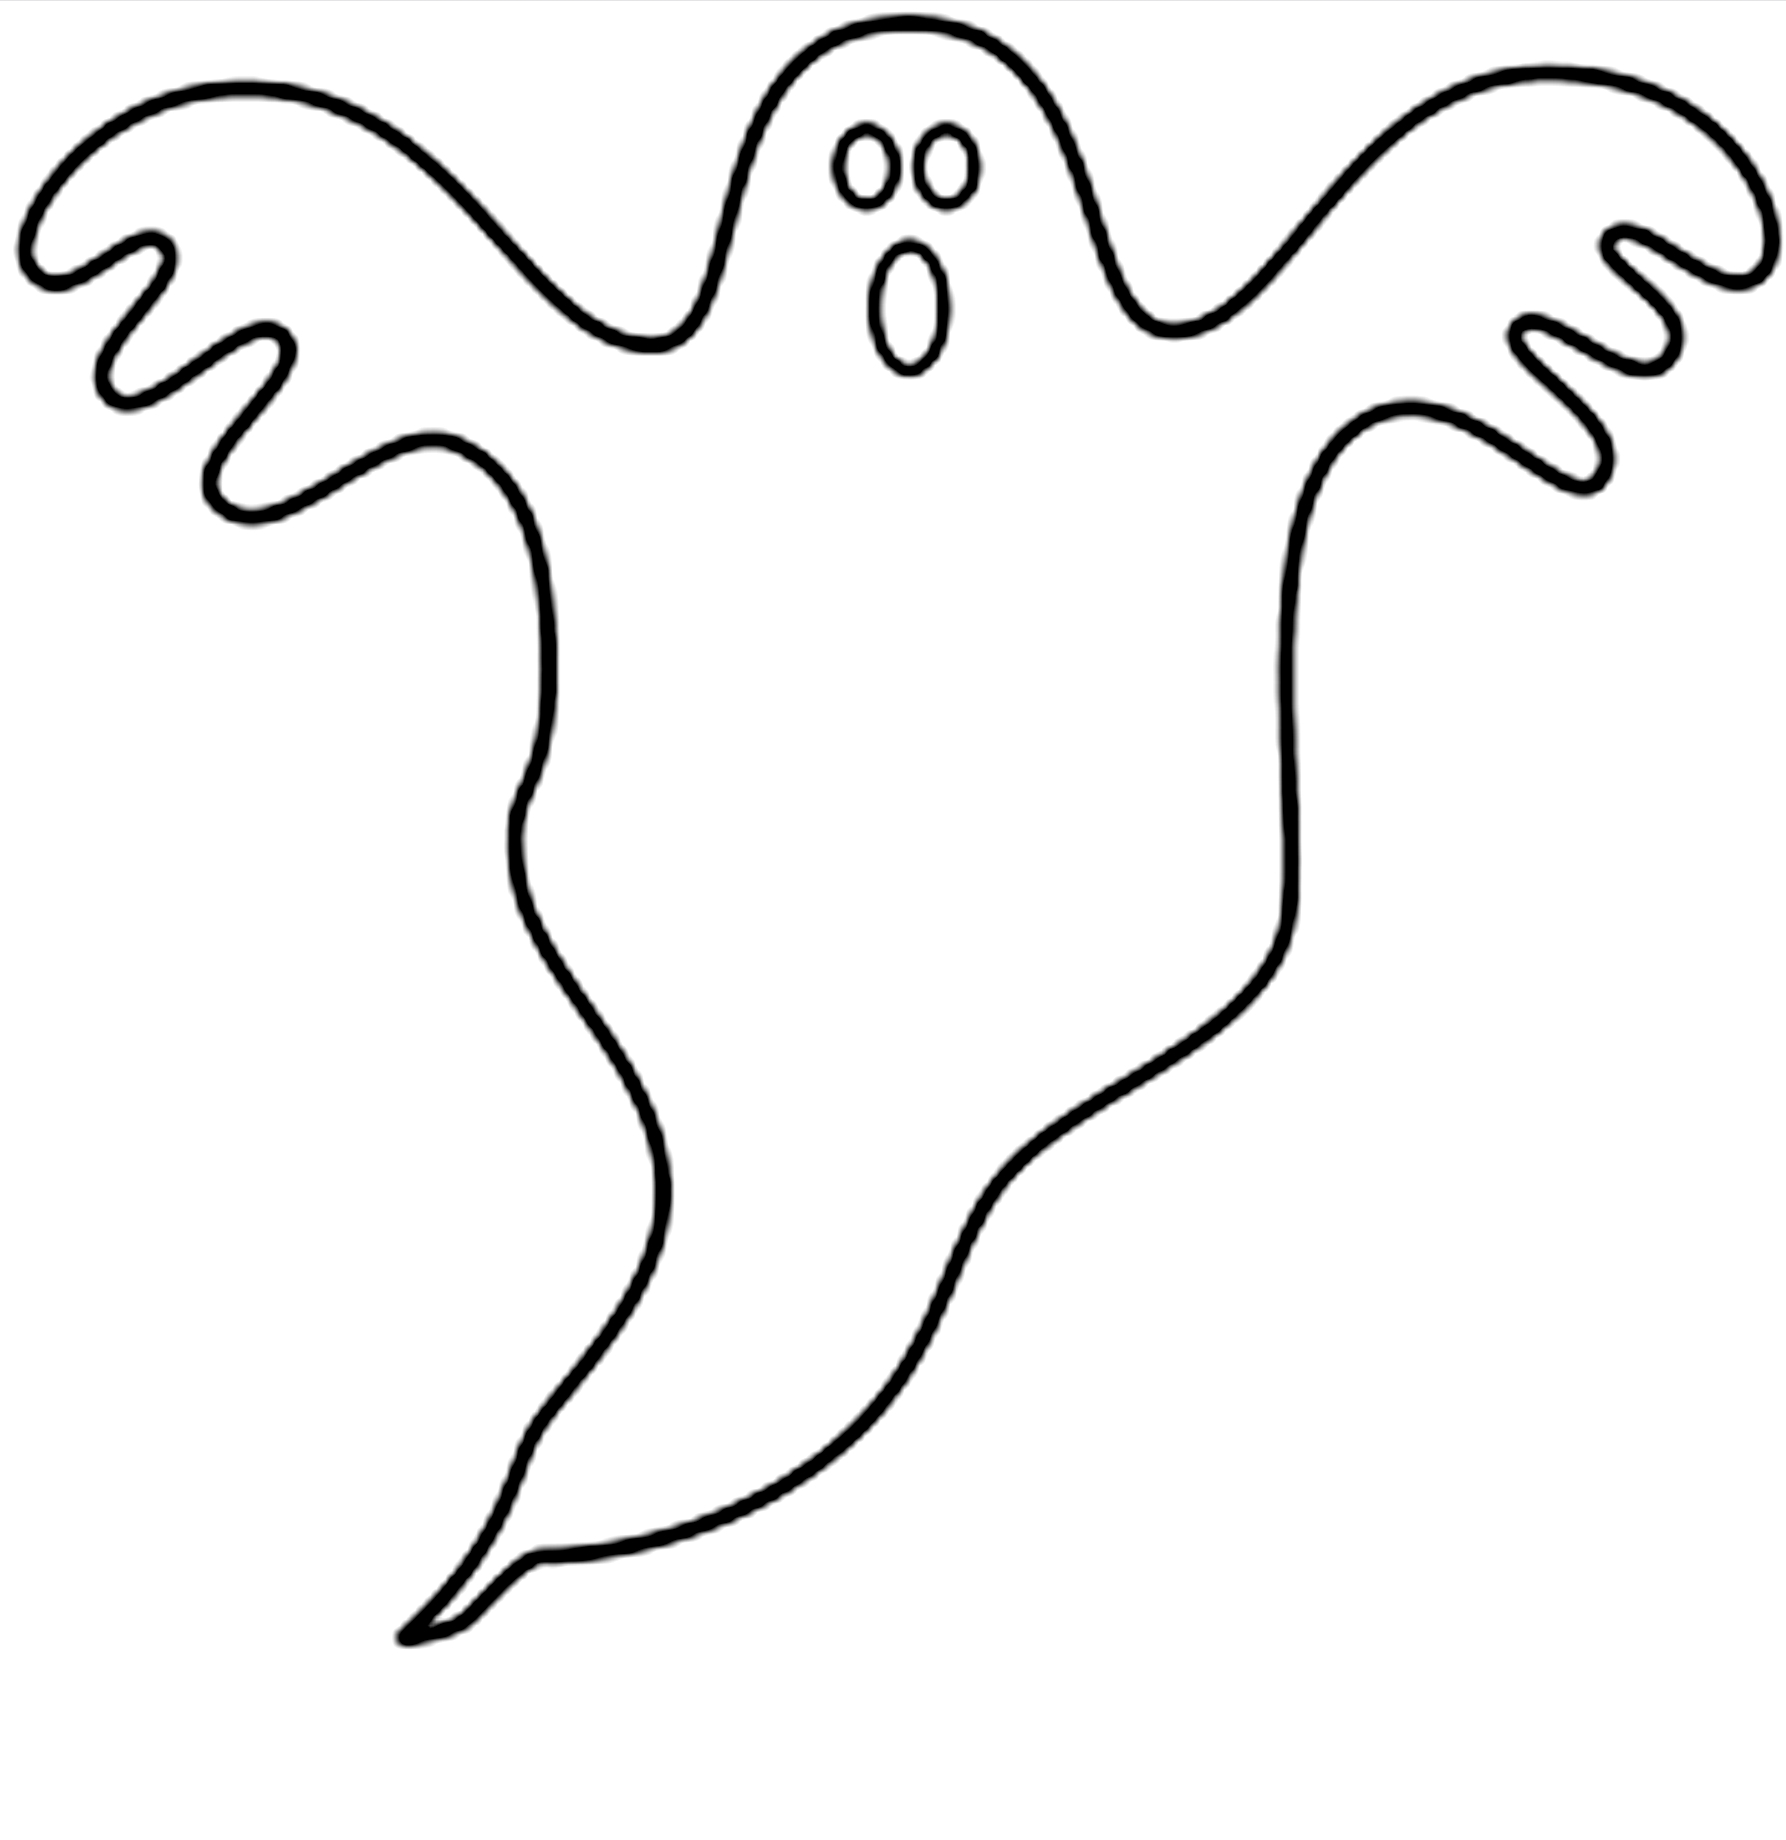 Drawing 13 from Ghosts coloring page to print and coloring